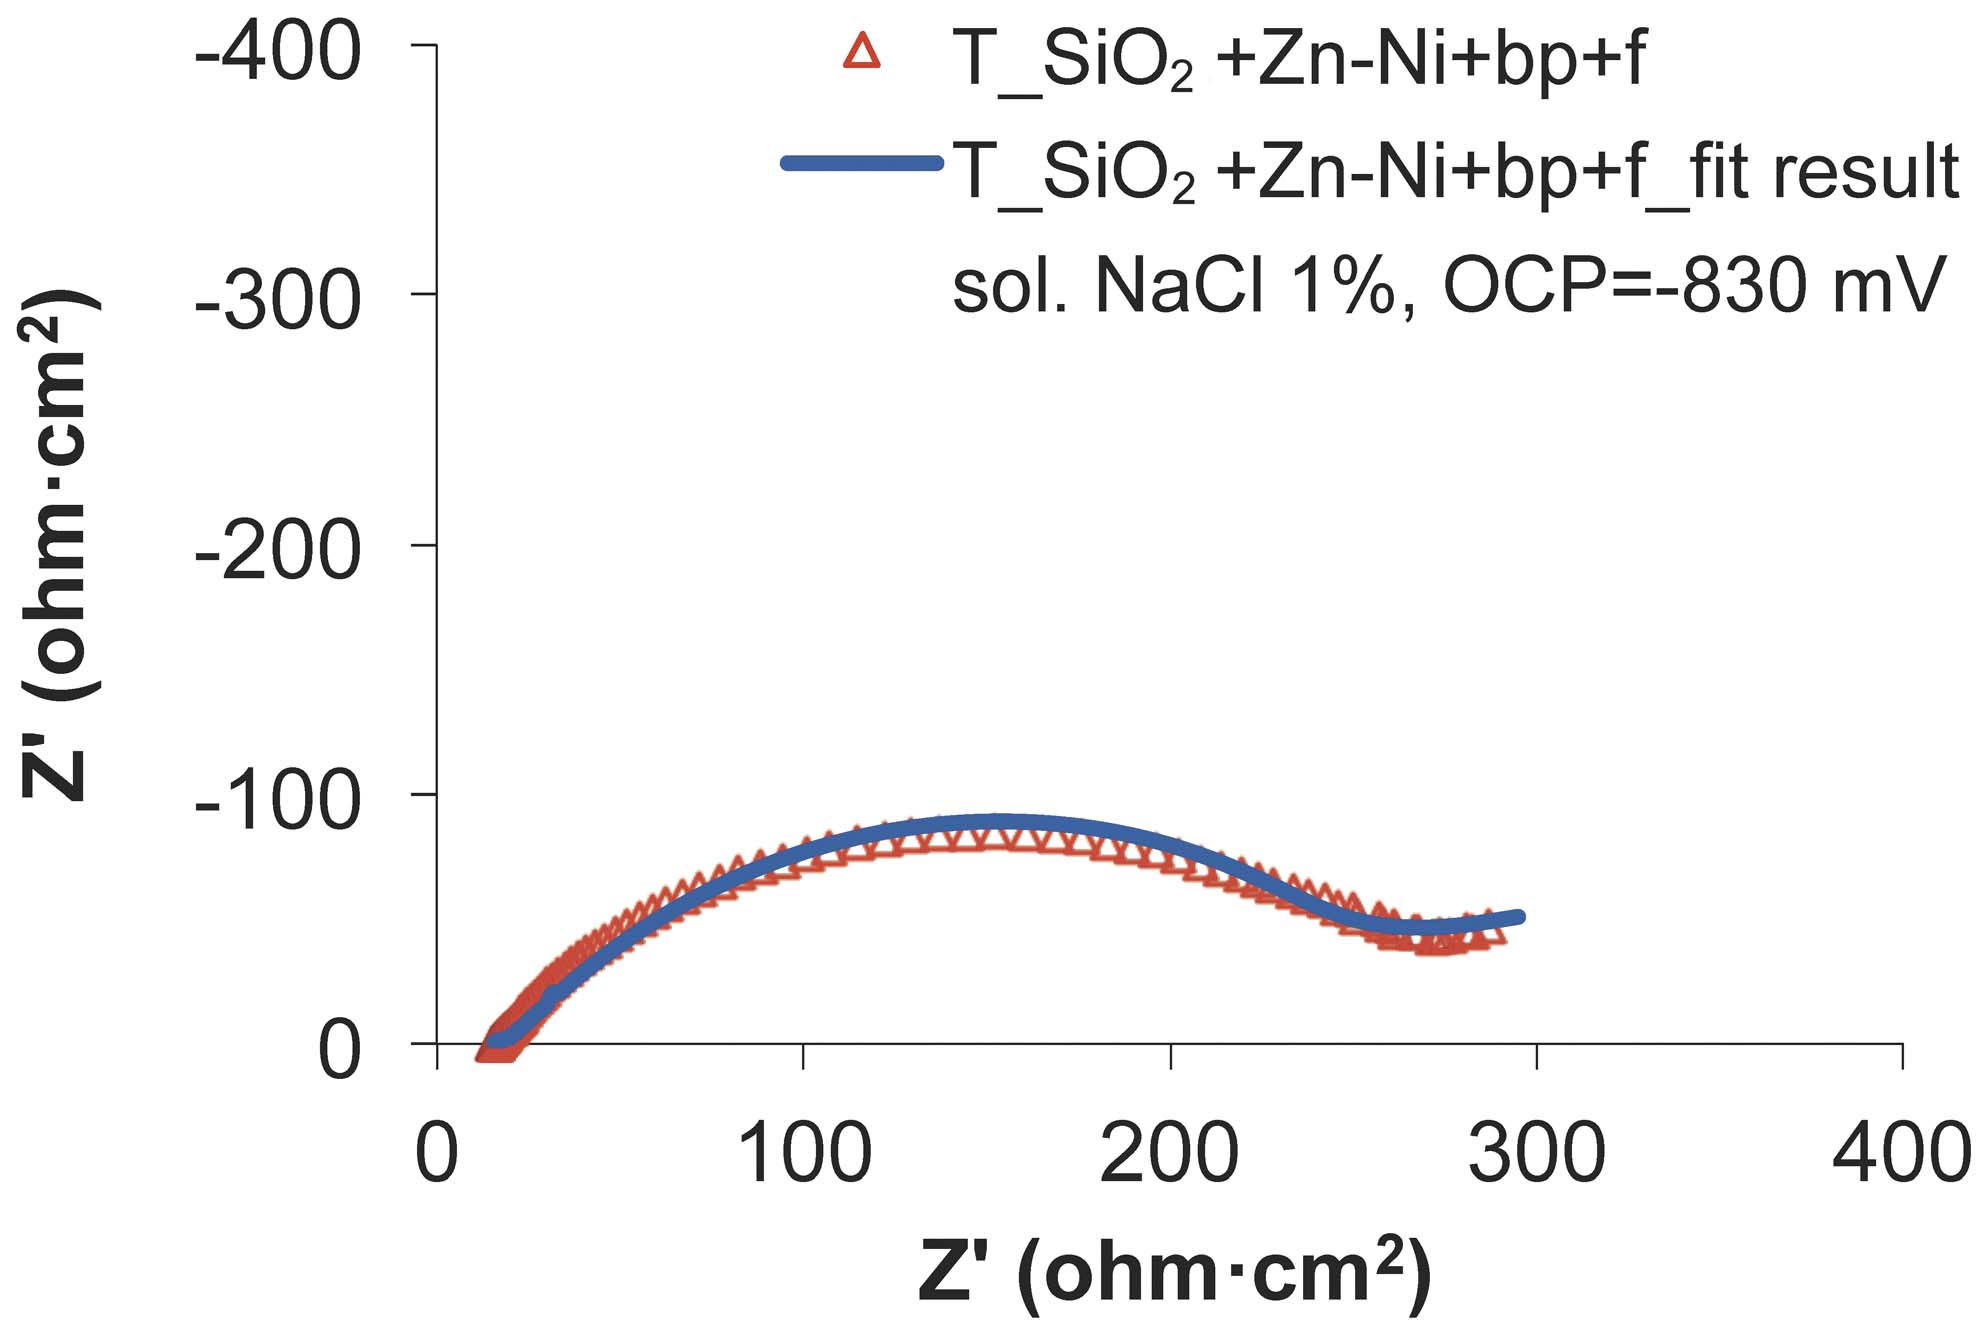 Fig. 14: The experimental and fitted Nyquist diagrams for SiO2+Zn-Ni+bp+f sample, after the wear test